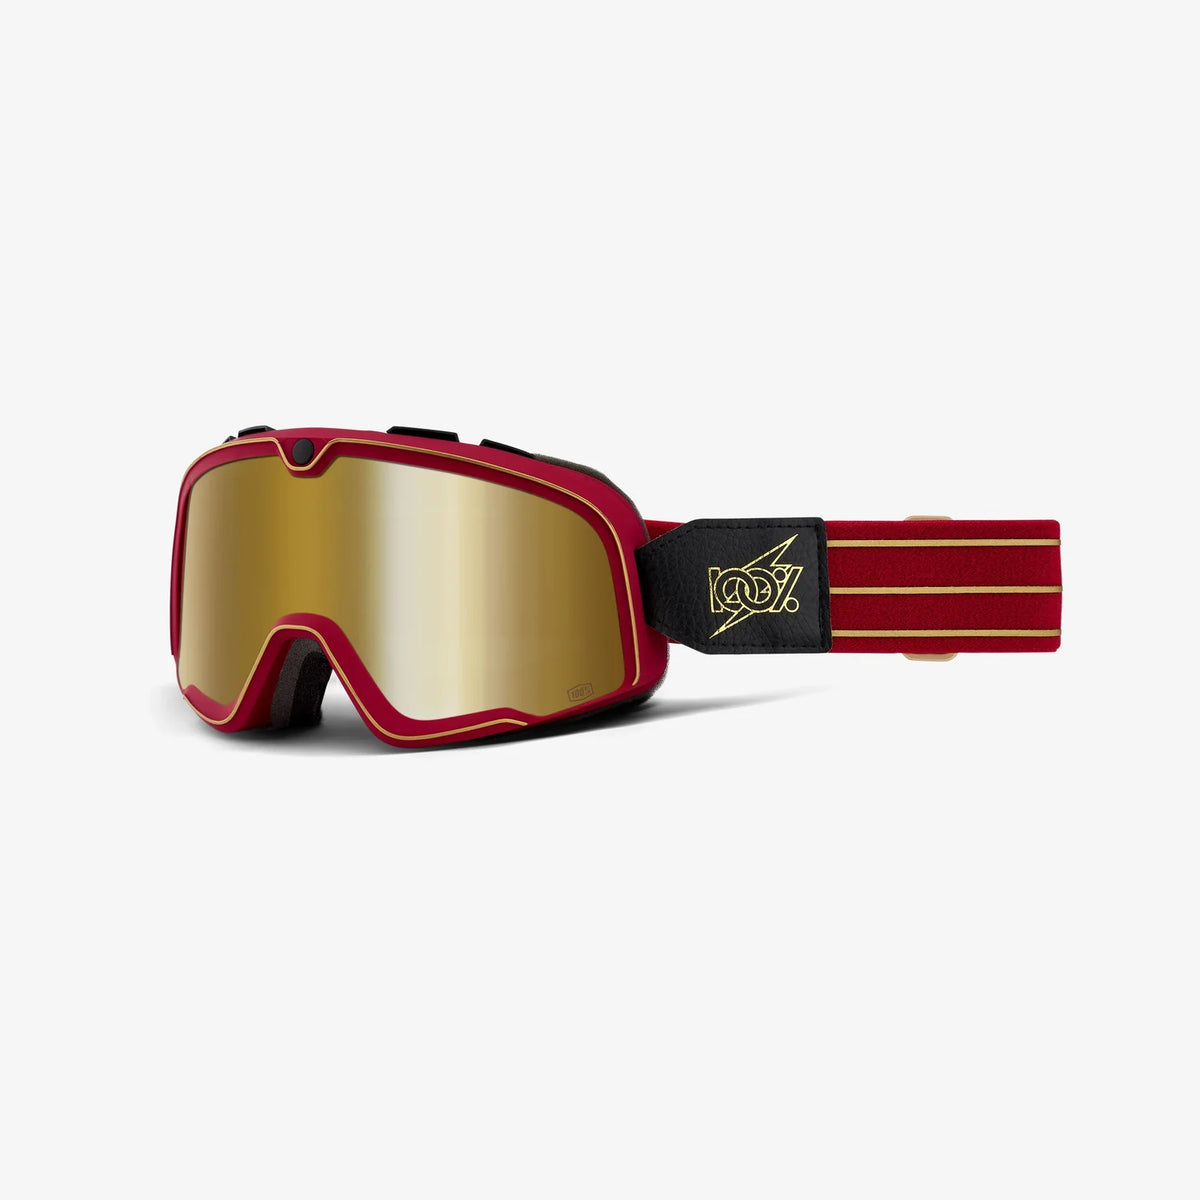 Goggle Barstow Cartier True Gold